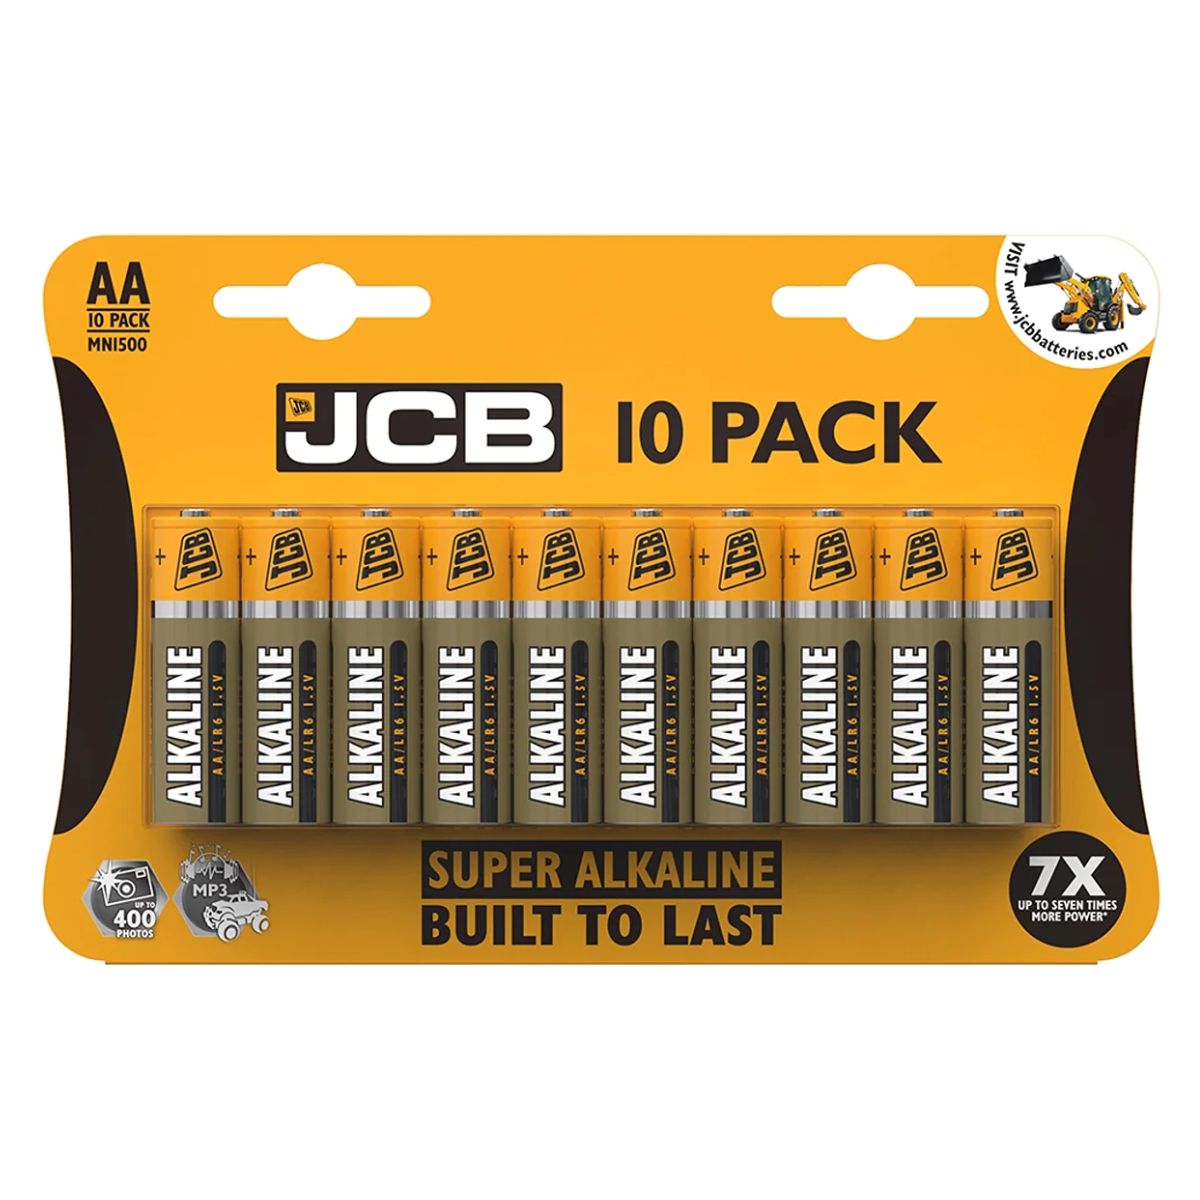 A 10-pack of JCB - Zinc Carbon AA 1.5V batteries in branded packaging.